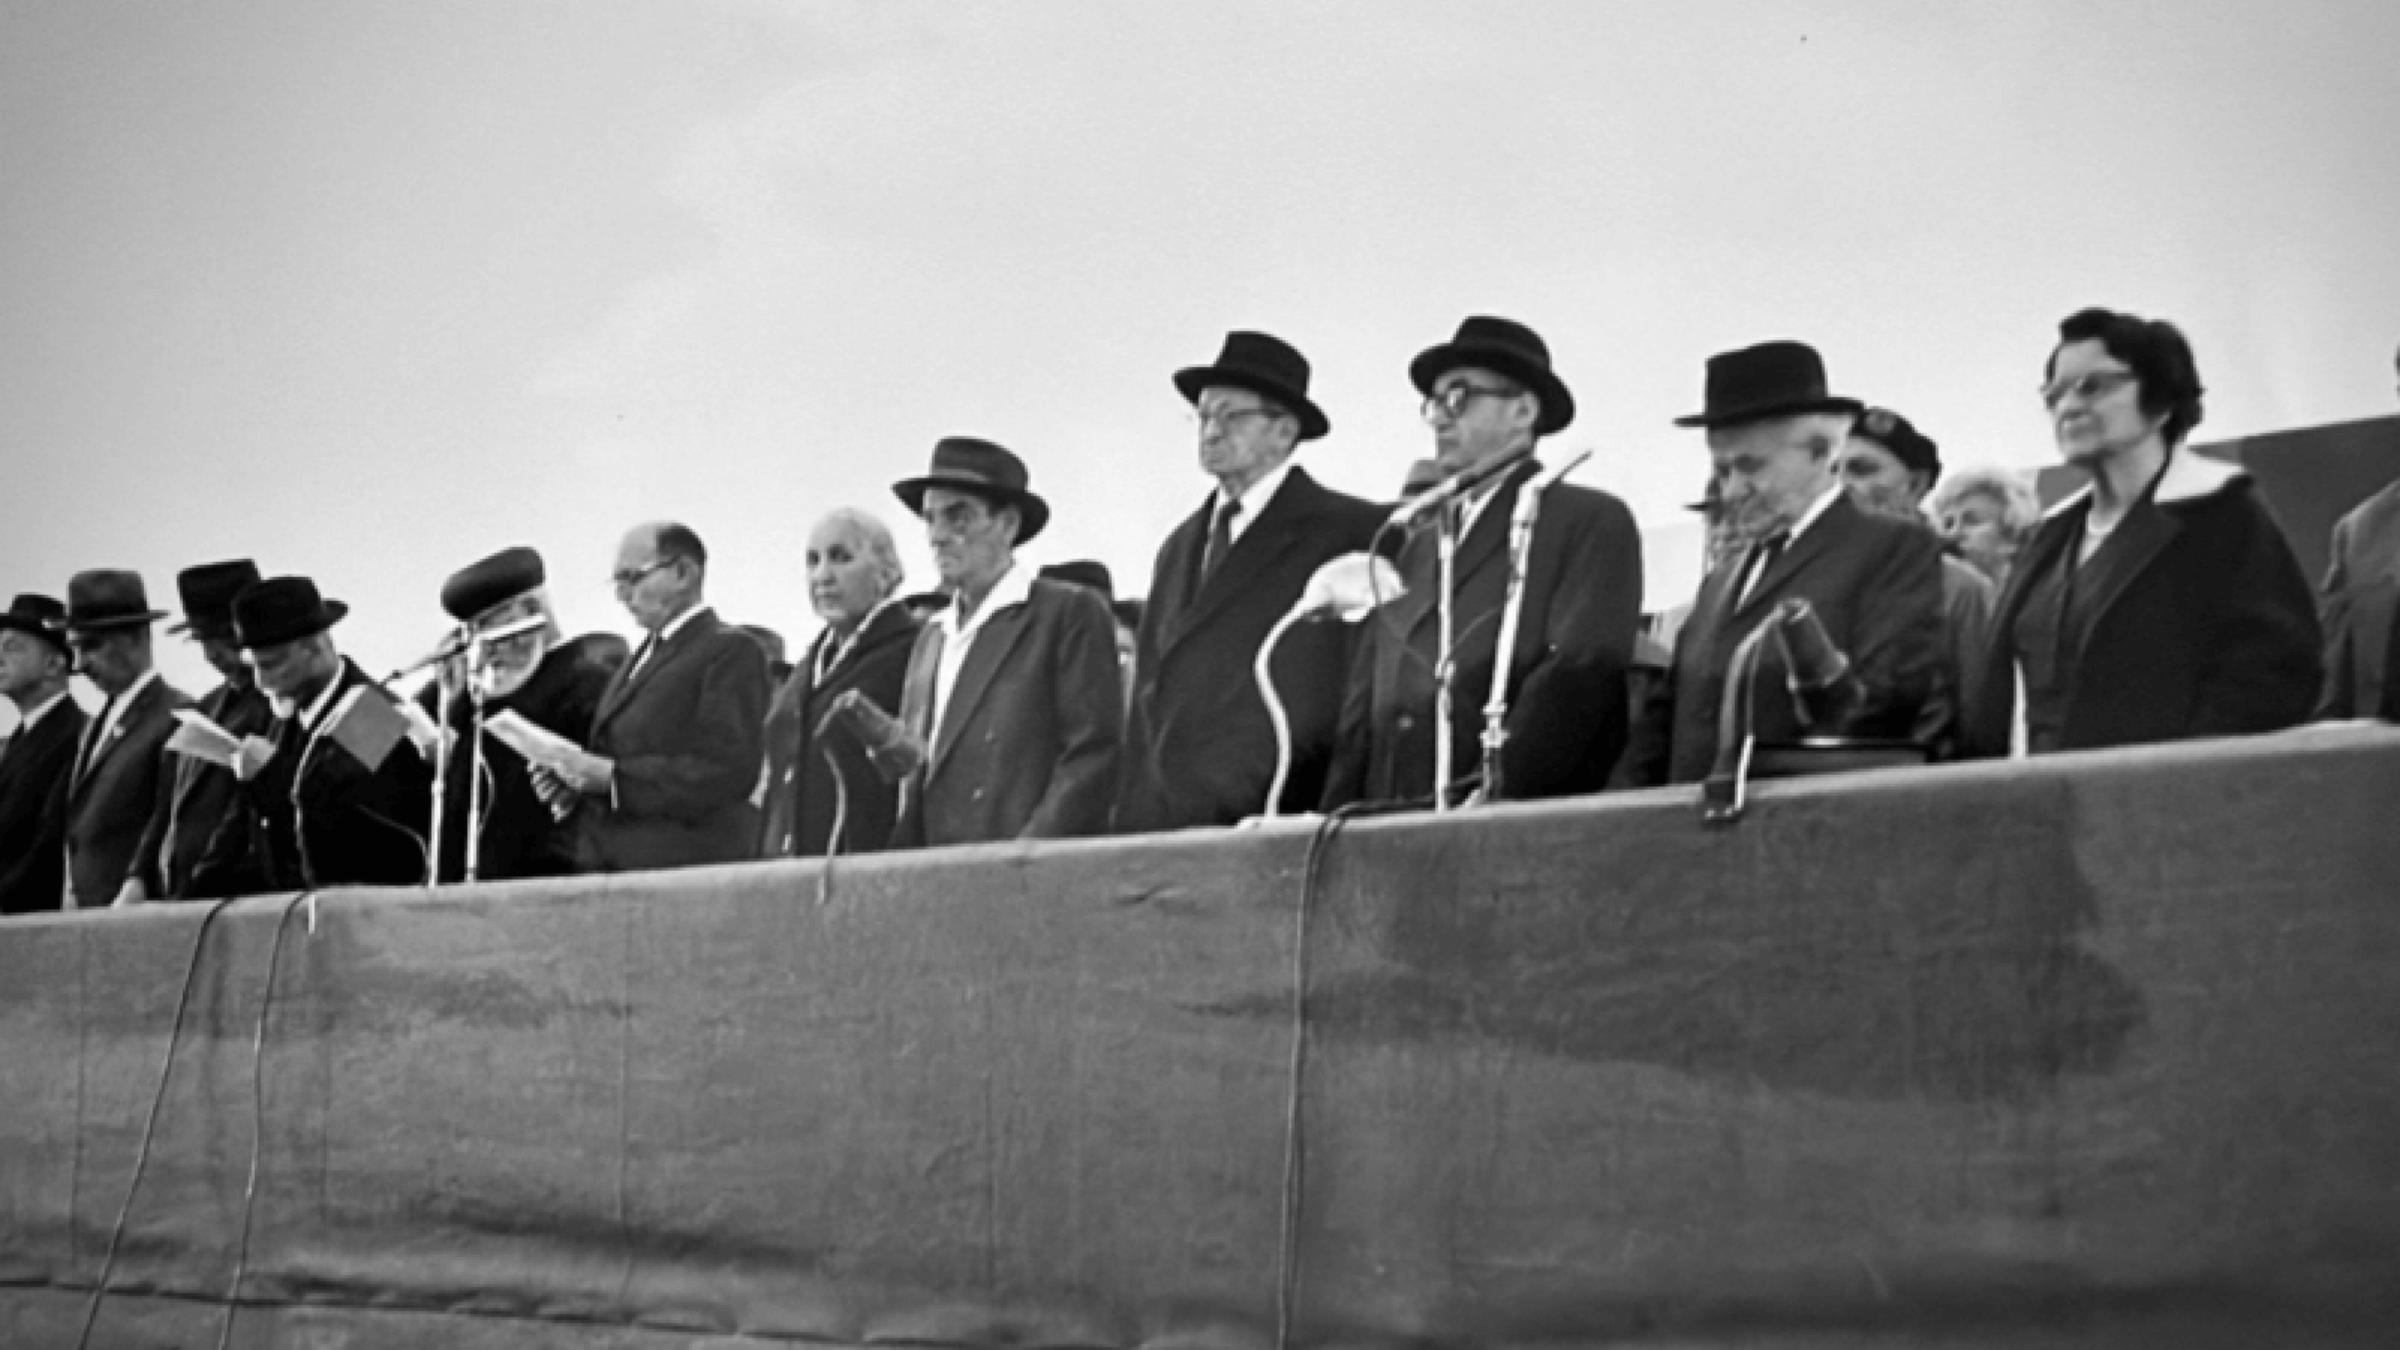 At a ceremony for Yom HaZikaron in 1962, Itamar's grandfather (third from right), who served as the chairman of Yad Vashem, stands next to Prime Minister David Ben Gurion (second from right).